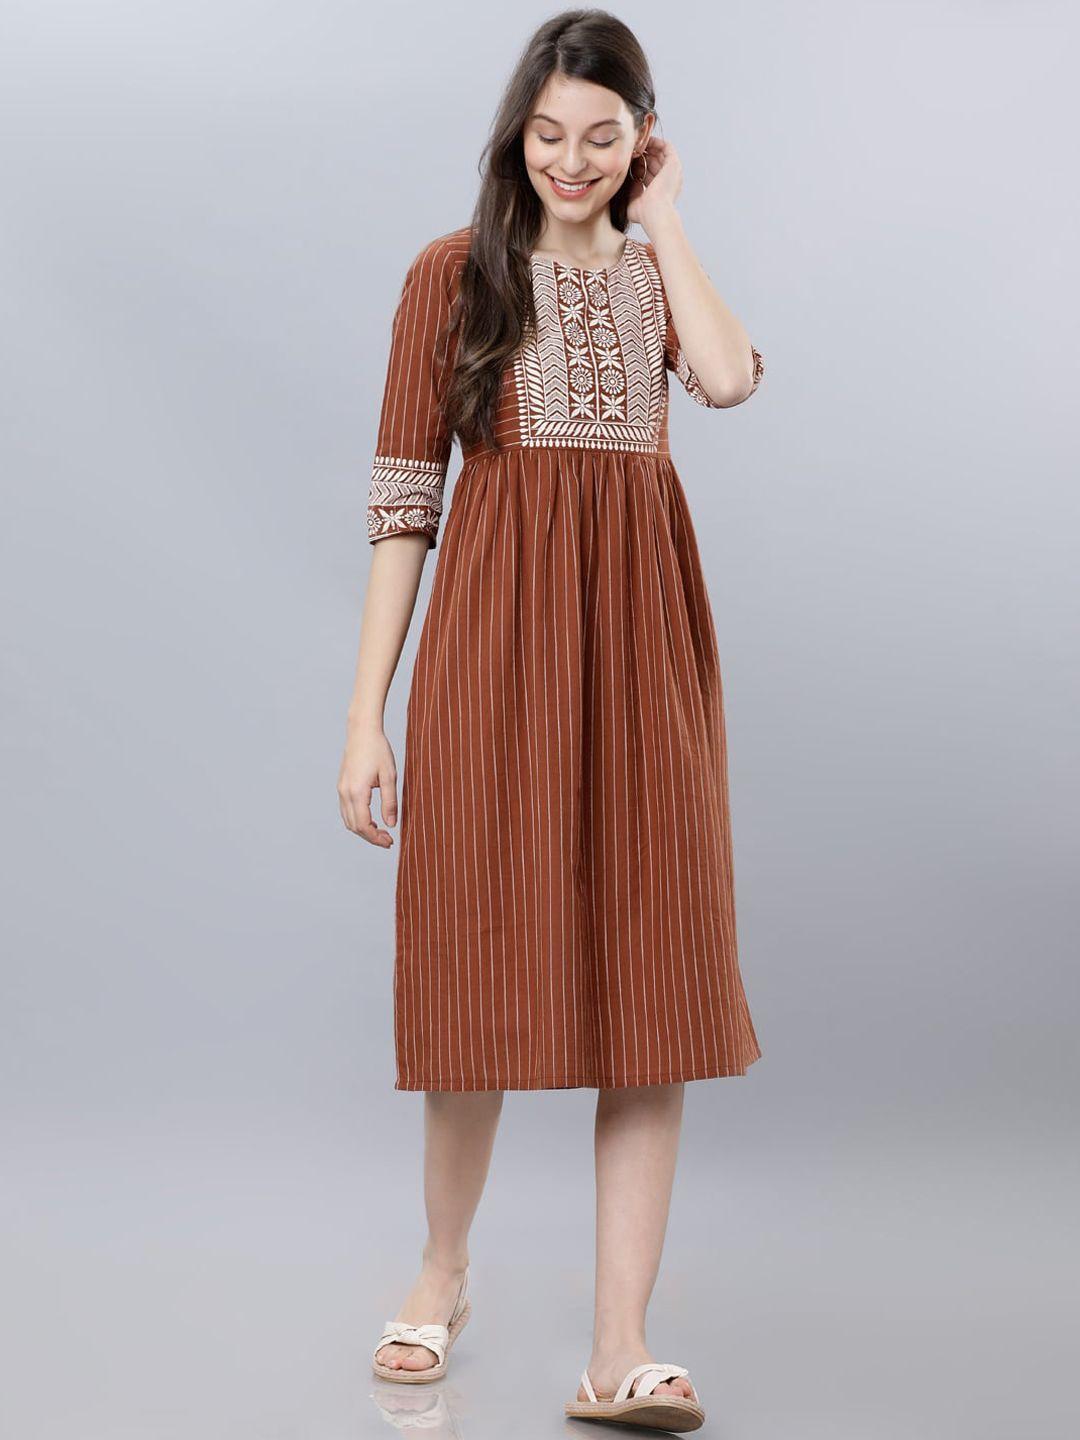 vishudh-women-brown-striped-fit-and-flare-dress